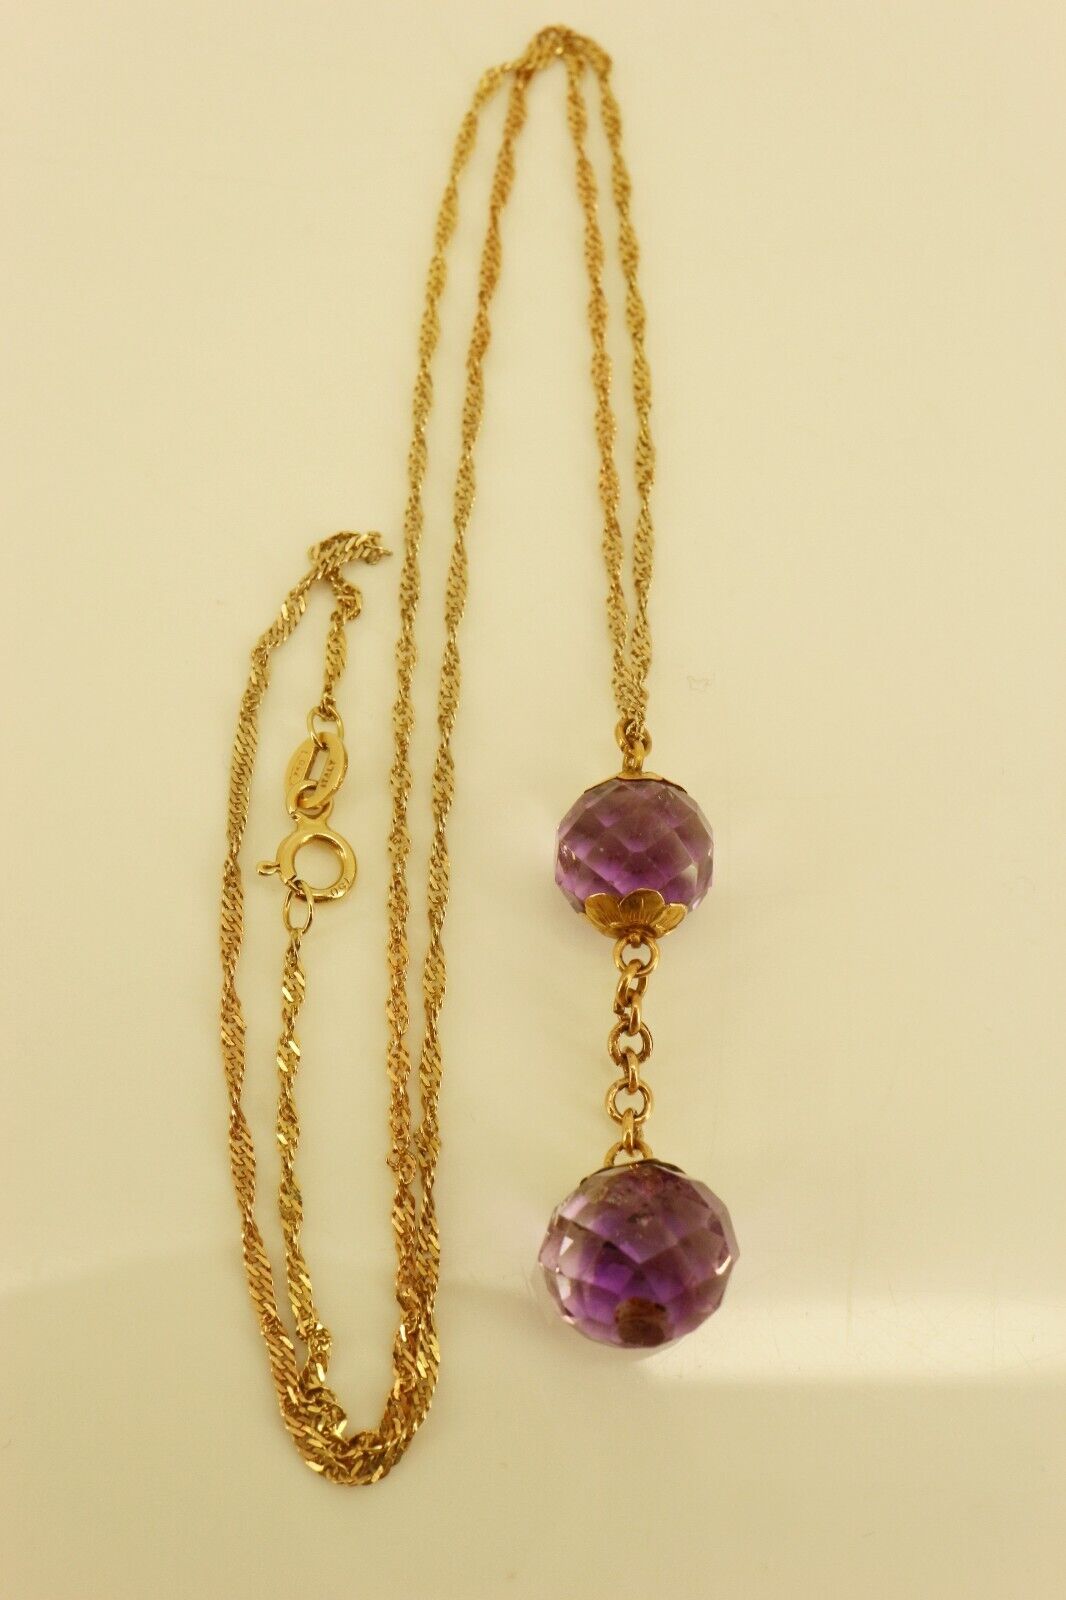 Antique 18 Ct Gold Necklace with Amethysts